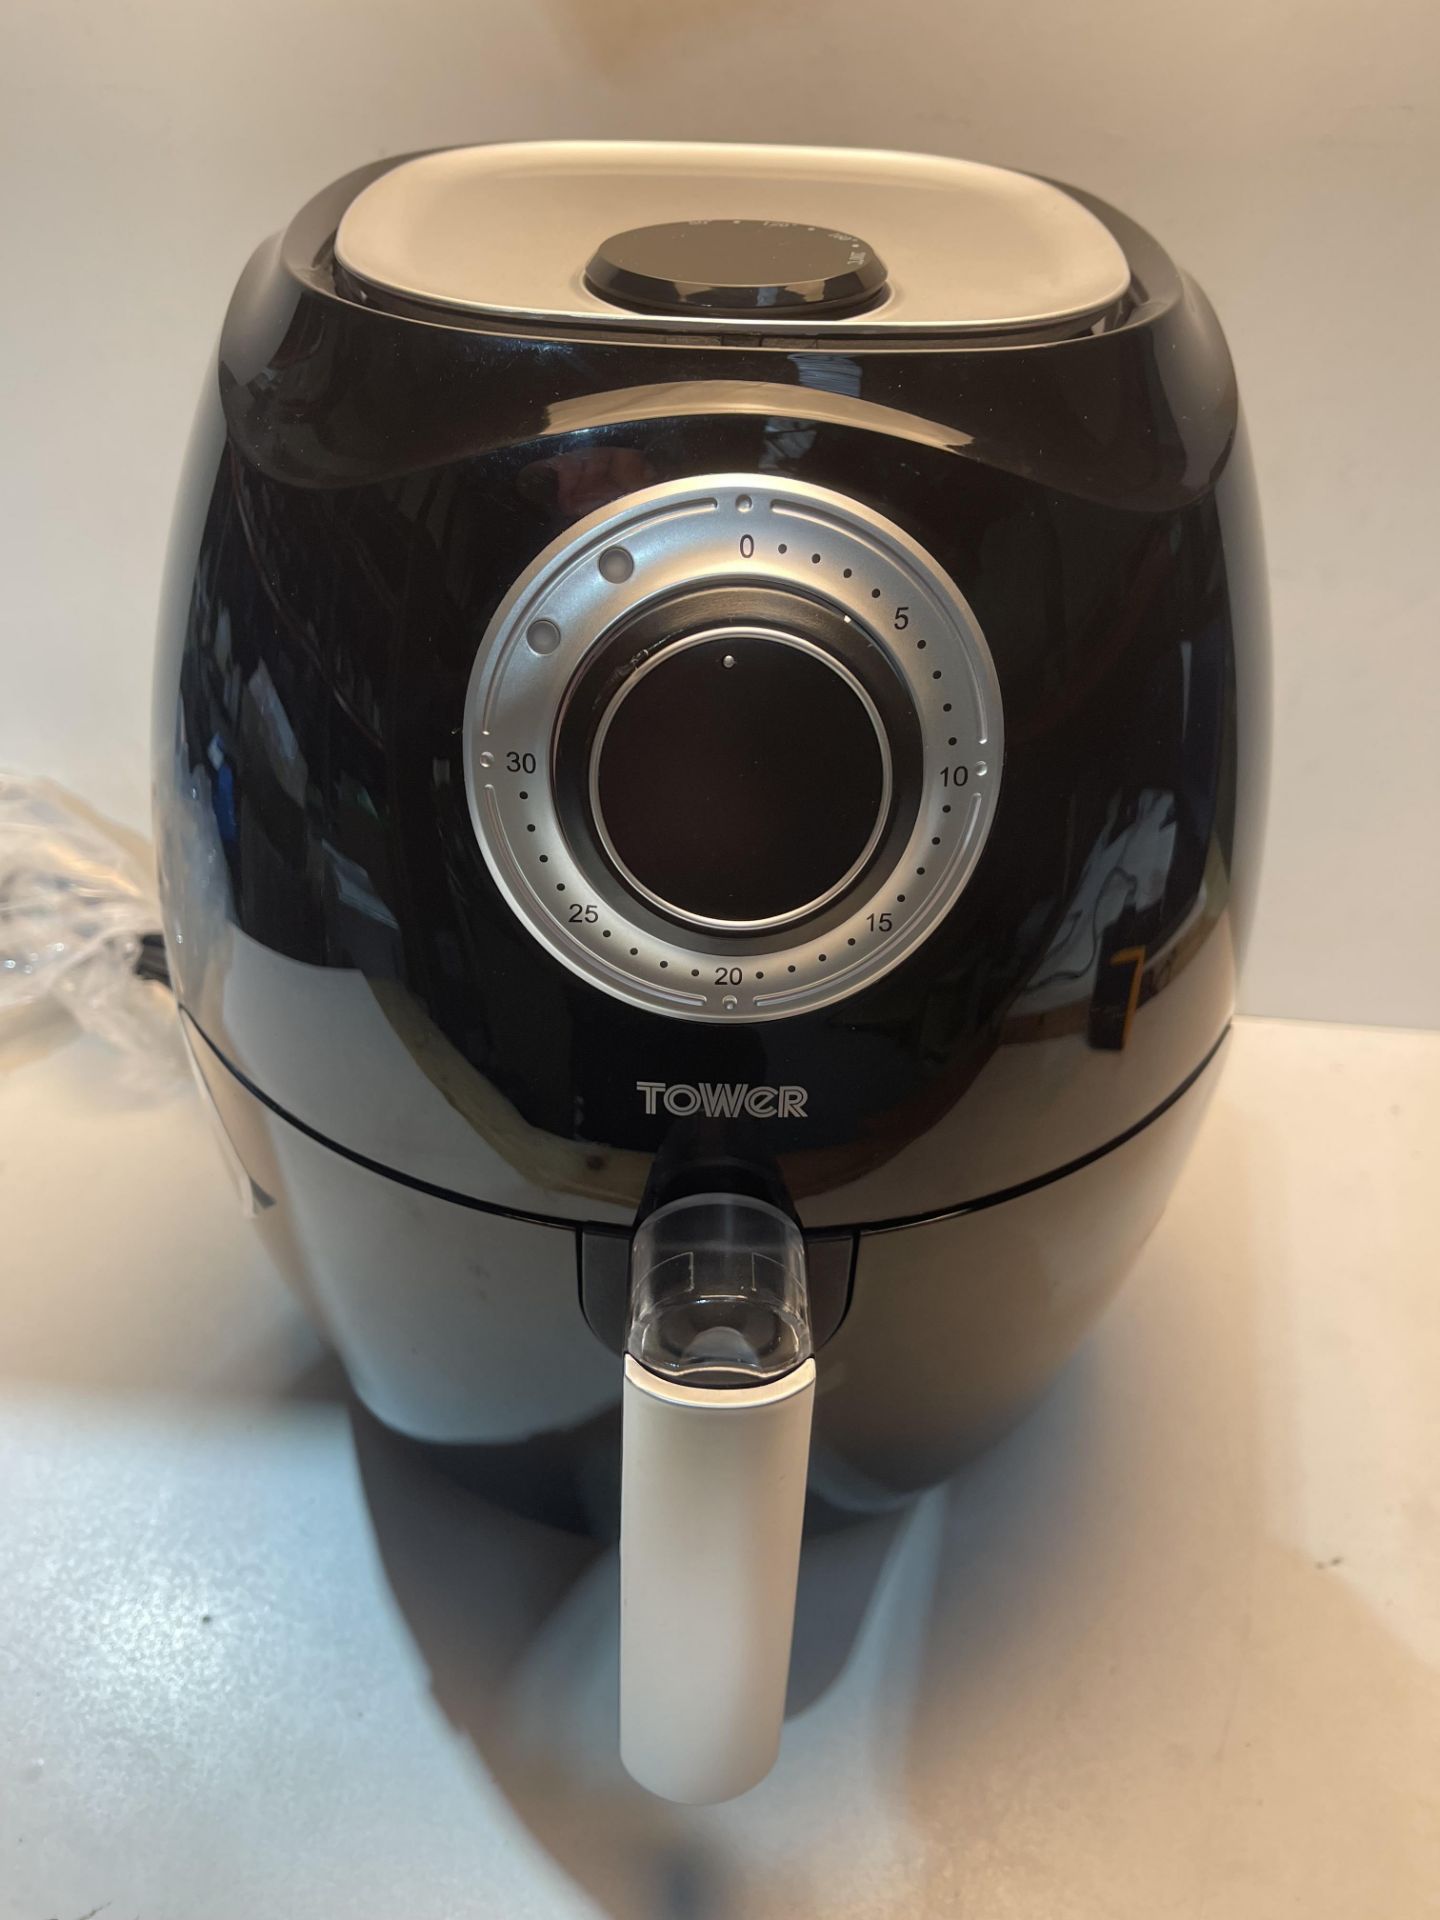 Tower T17005 Health Manual Air Fryer Oven with Rapid Air Circulation and 30 Min Timer, 3.2 Litre,